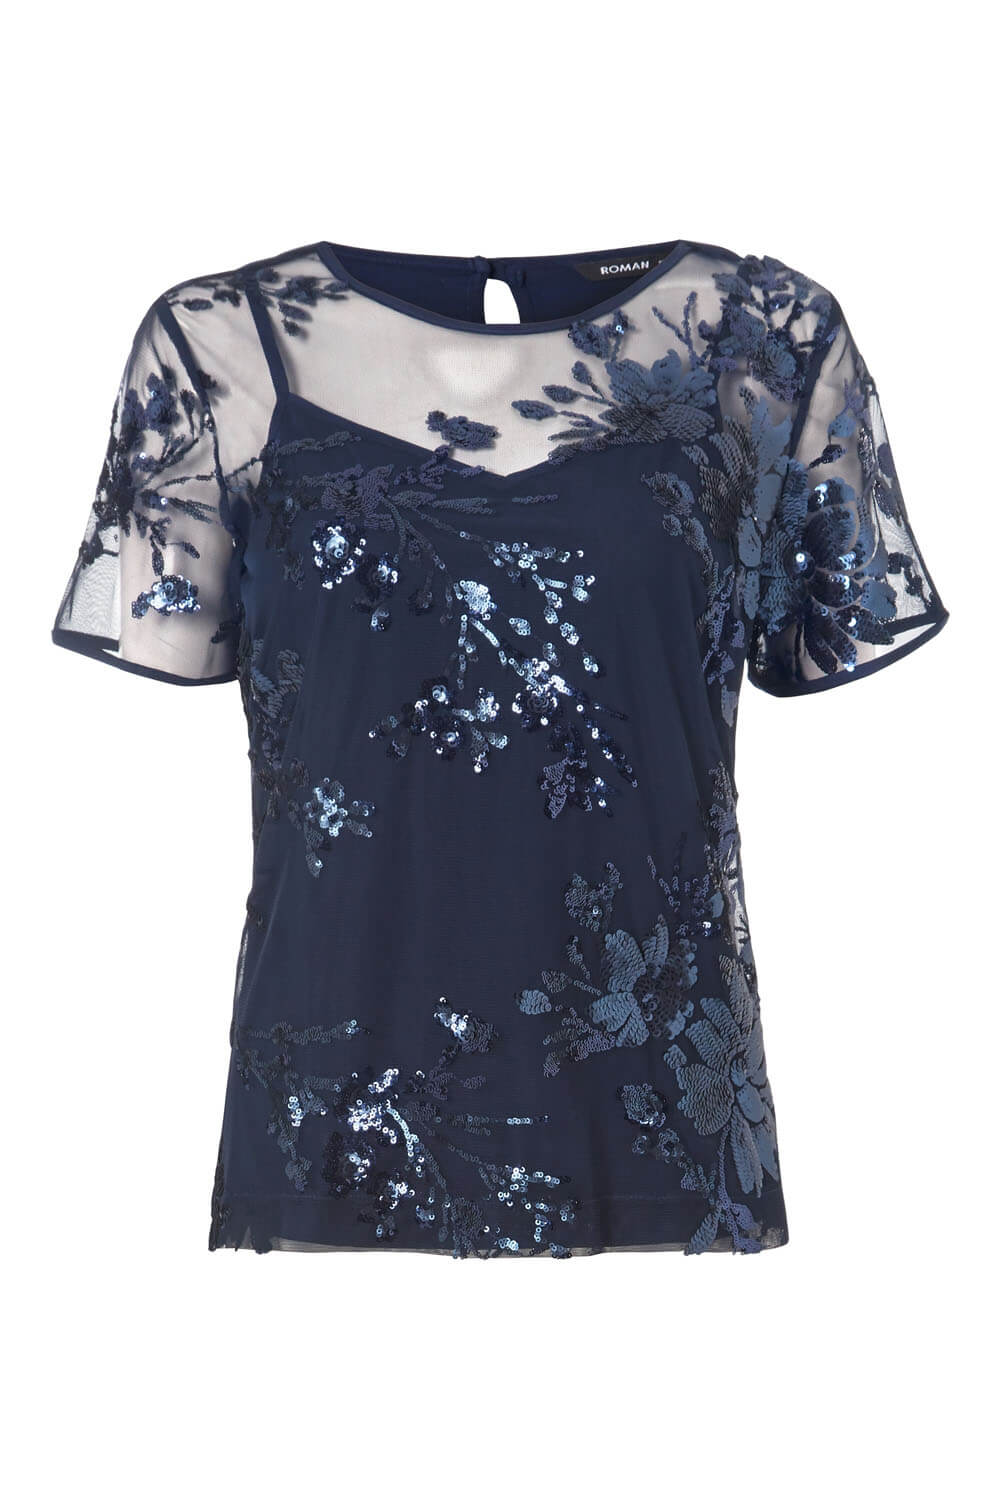 Navy  Floral Mesh Embroidered Top, Image 5 of 5